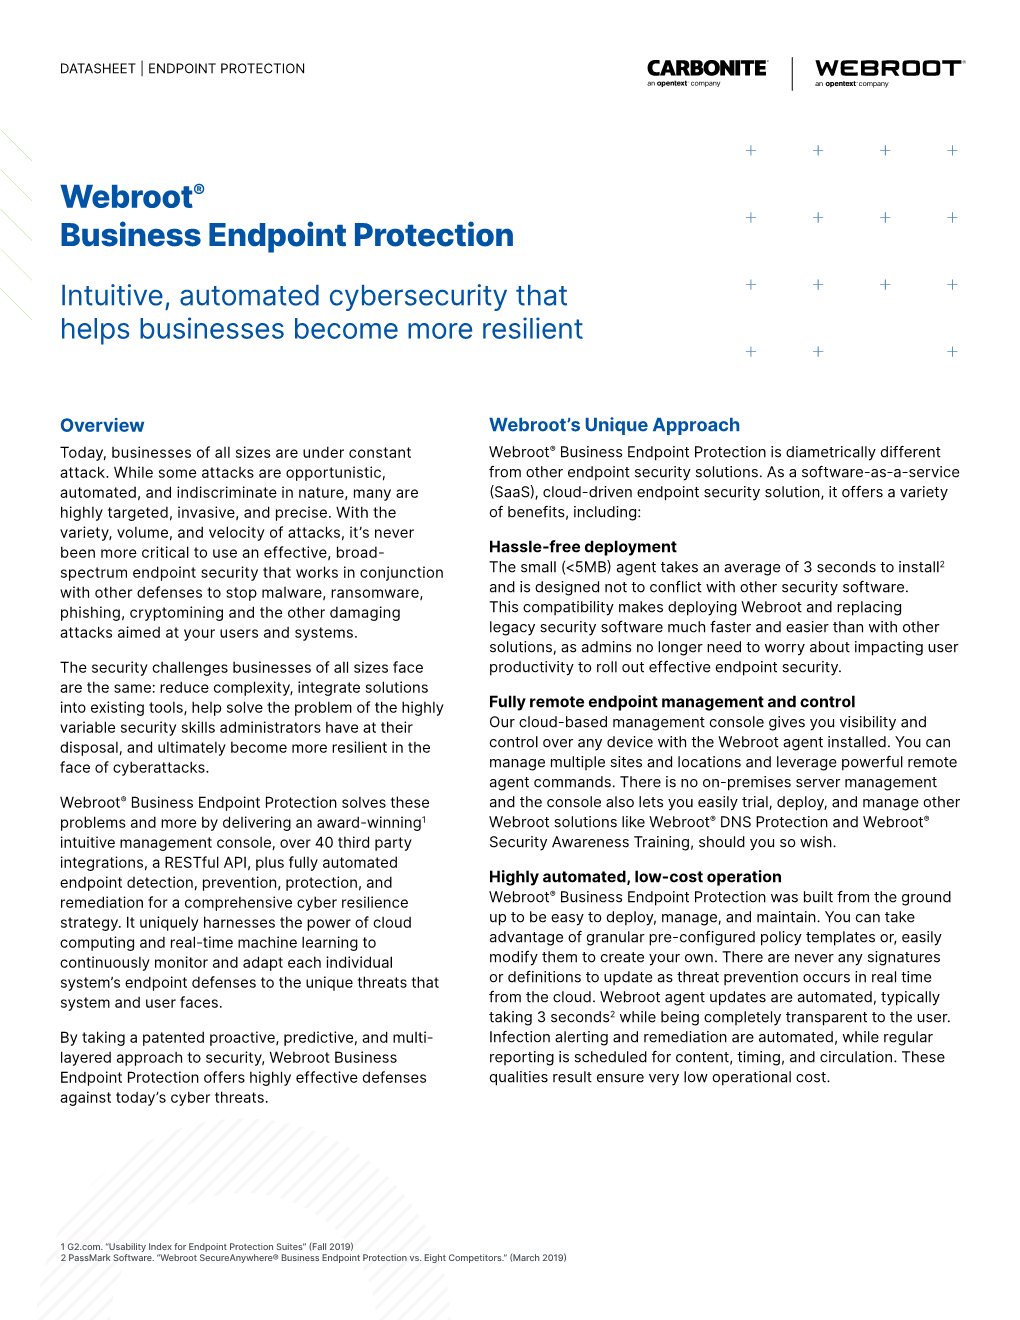 Webroot® Business Endpoint Protection